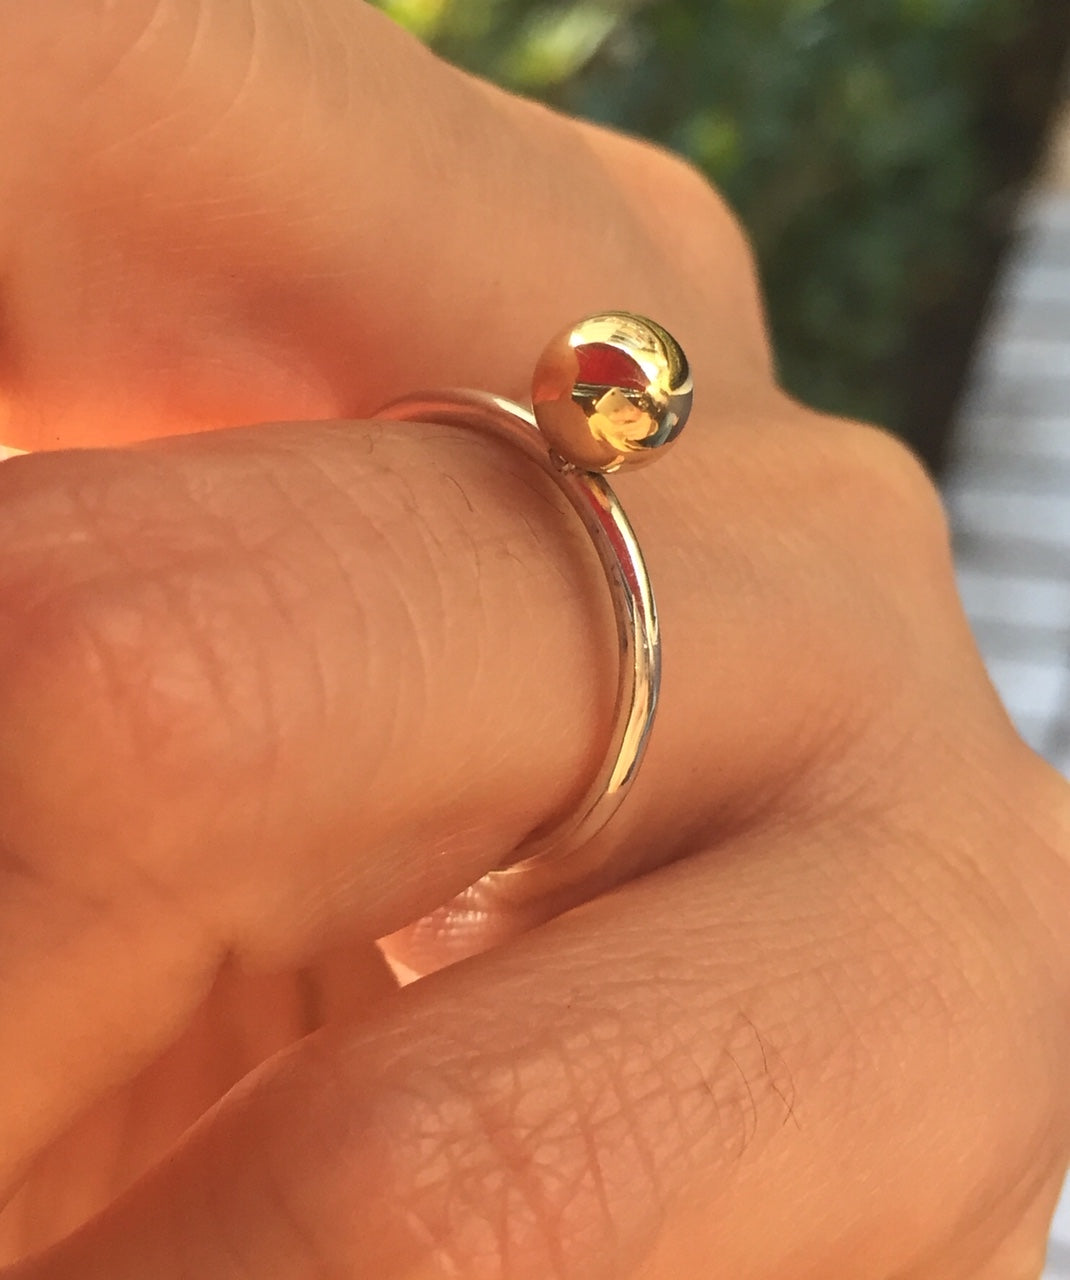 18K Gold Ball / Sphere / Globe on 1.5mm Sterling Silver925 Ring For Women コンビネーション・ゴールドボールリング